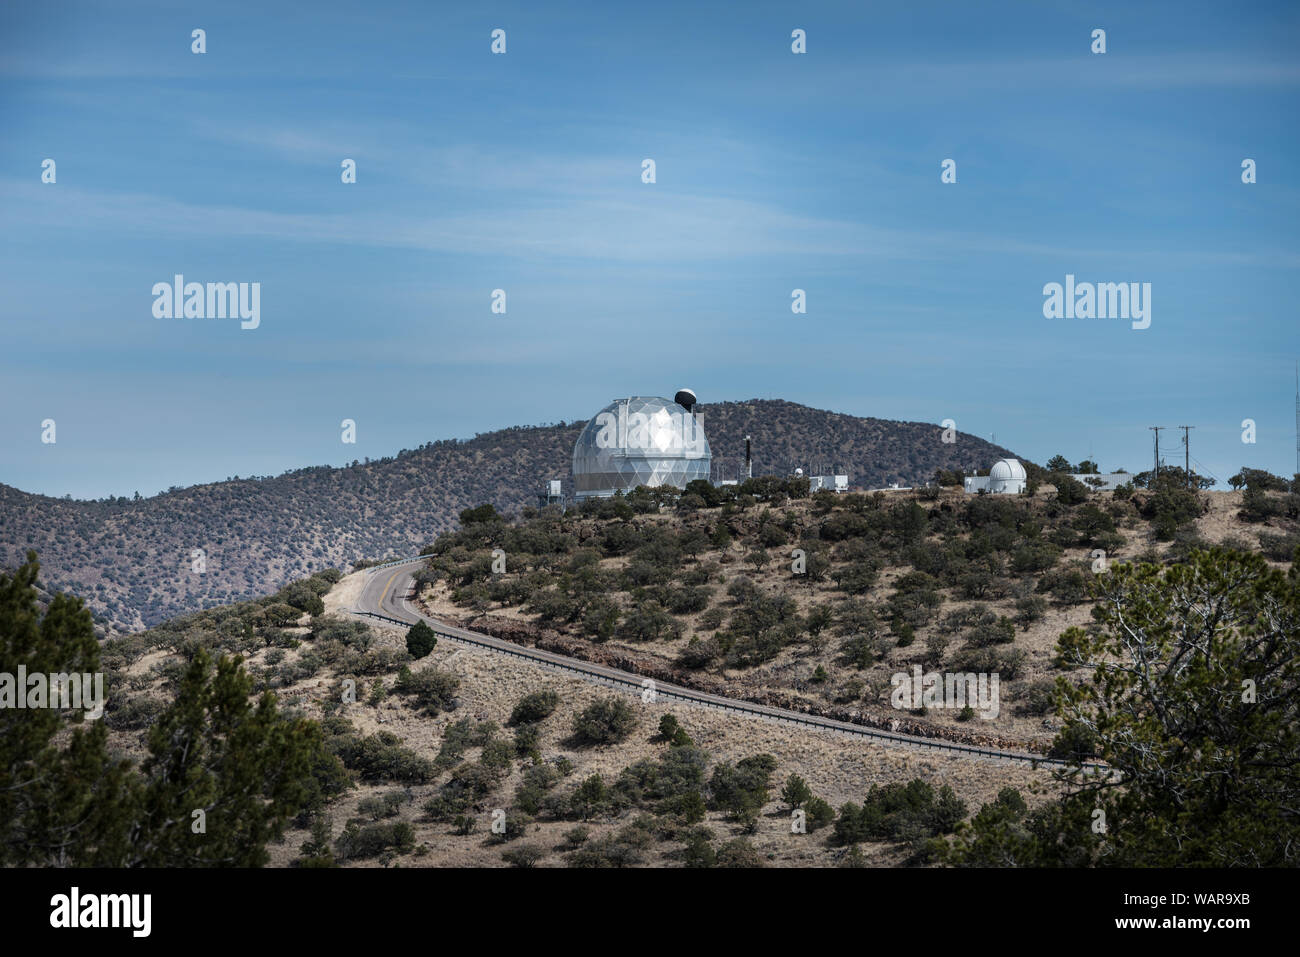 Distant view of two facilities at the McDonald Observatory on Mount Locke, above the city of Fort Davis in the Davis Mountains of West Texas Stock Photo